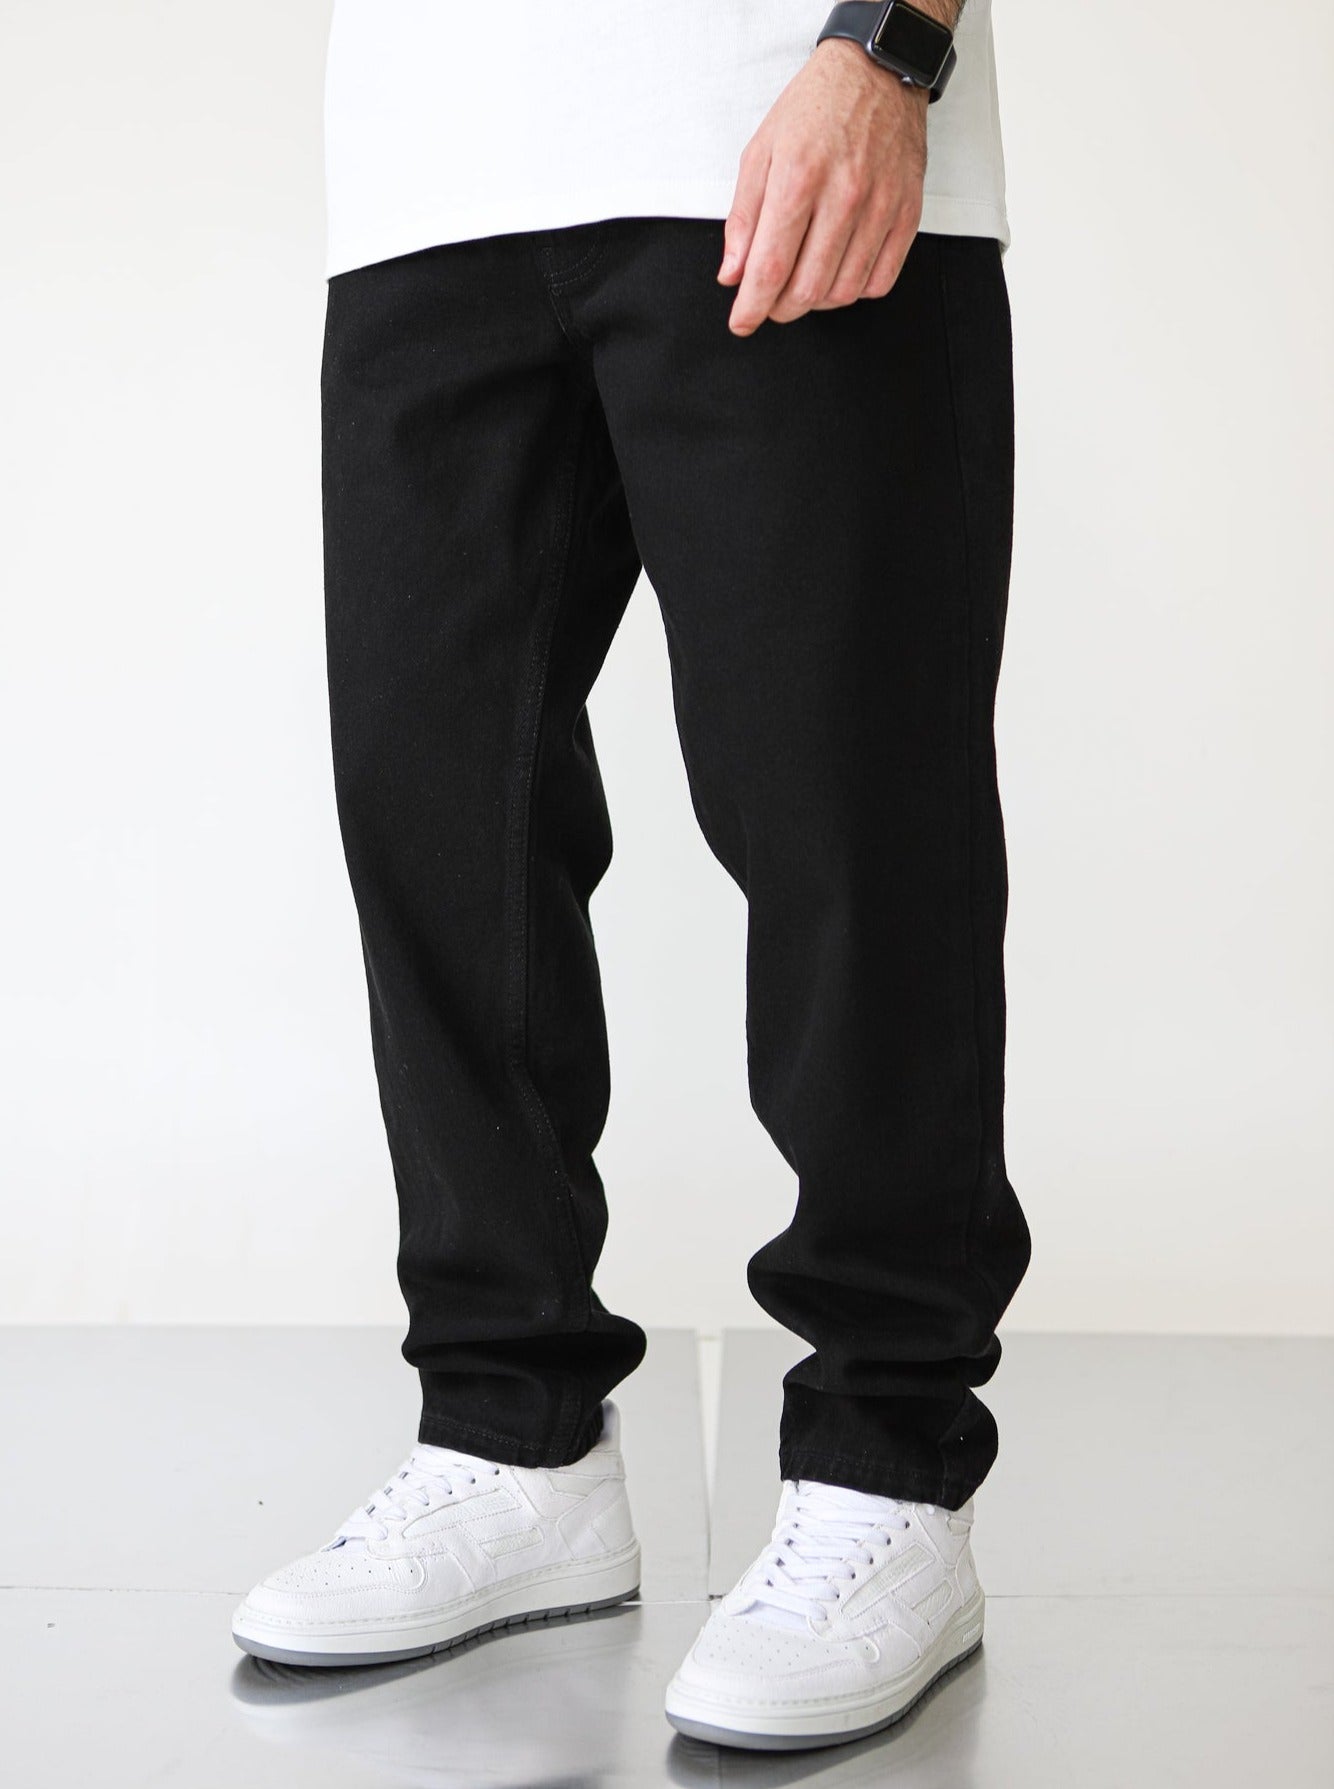 Premium Relaxed Fit Black Basic Jeans - UNEFFECTED STUDIOS® - JEANS - UNEFFECTED STUDIOS®